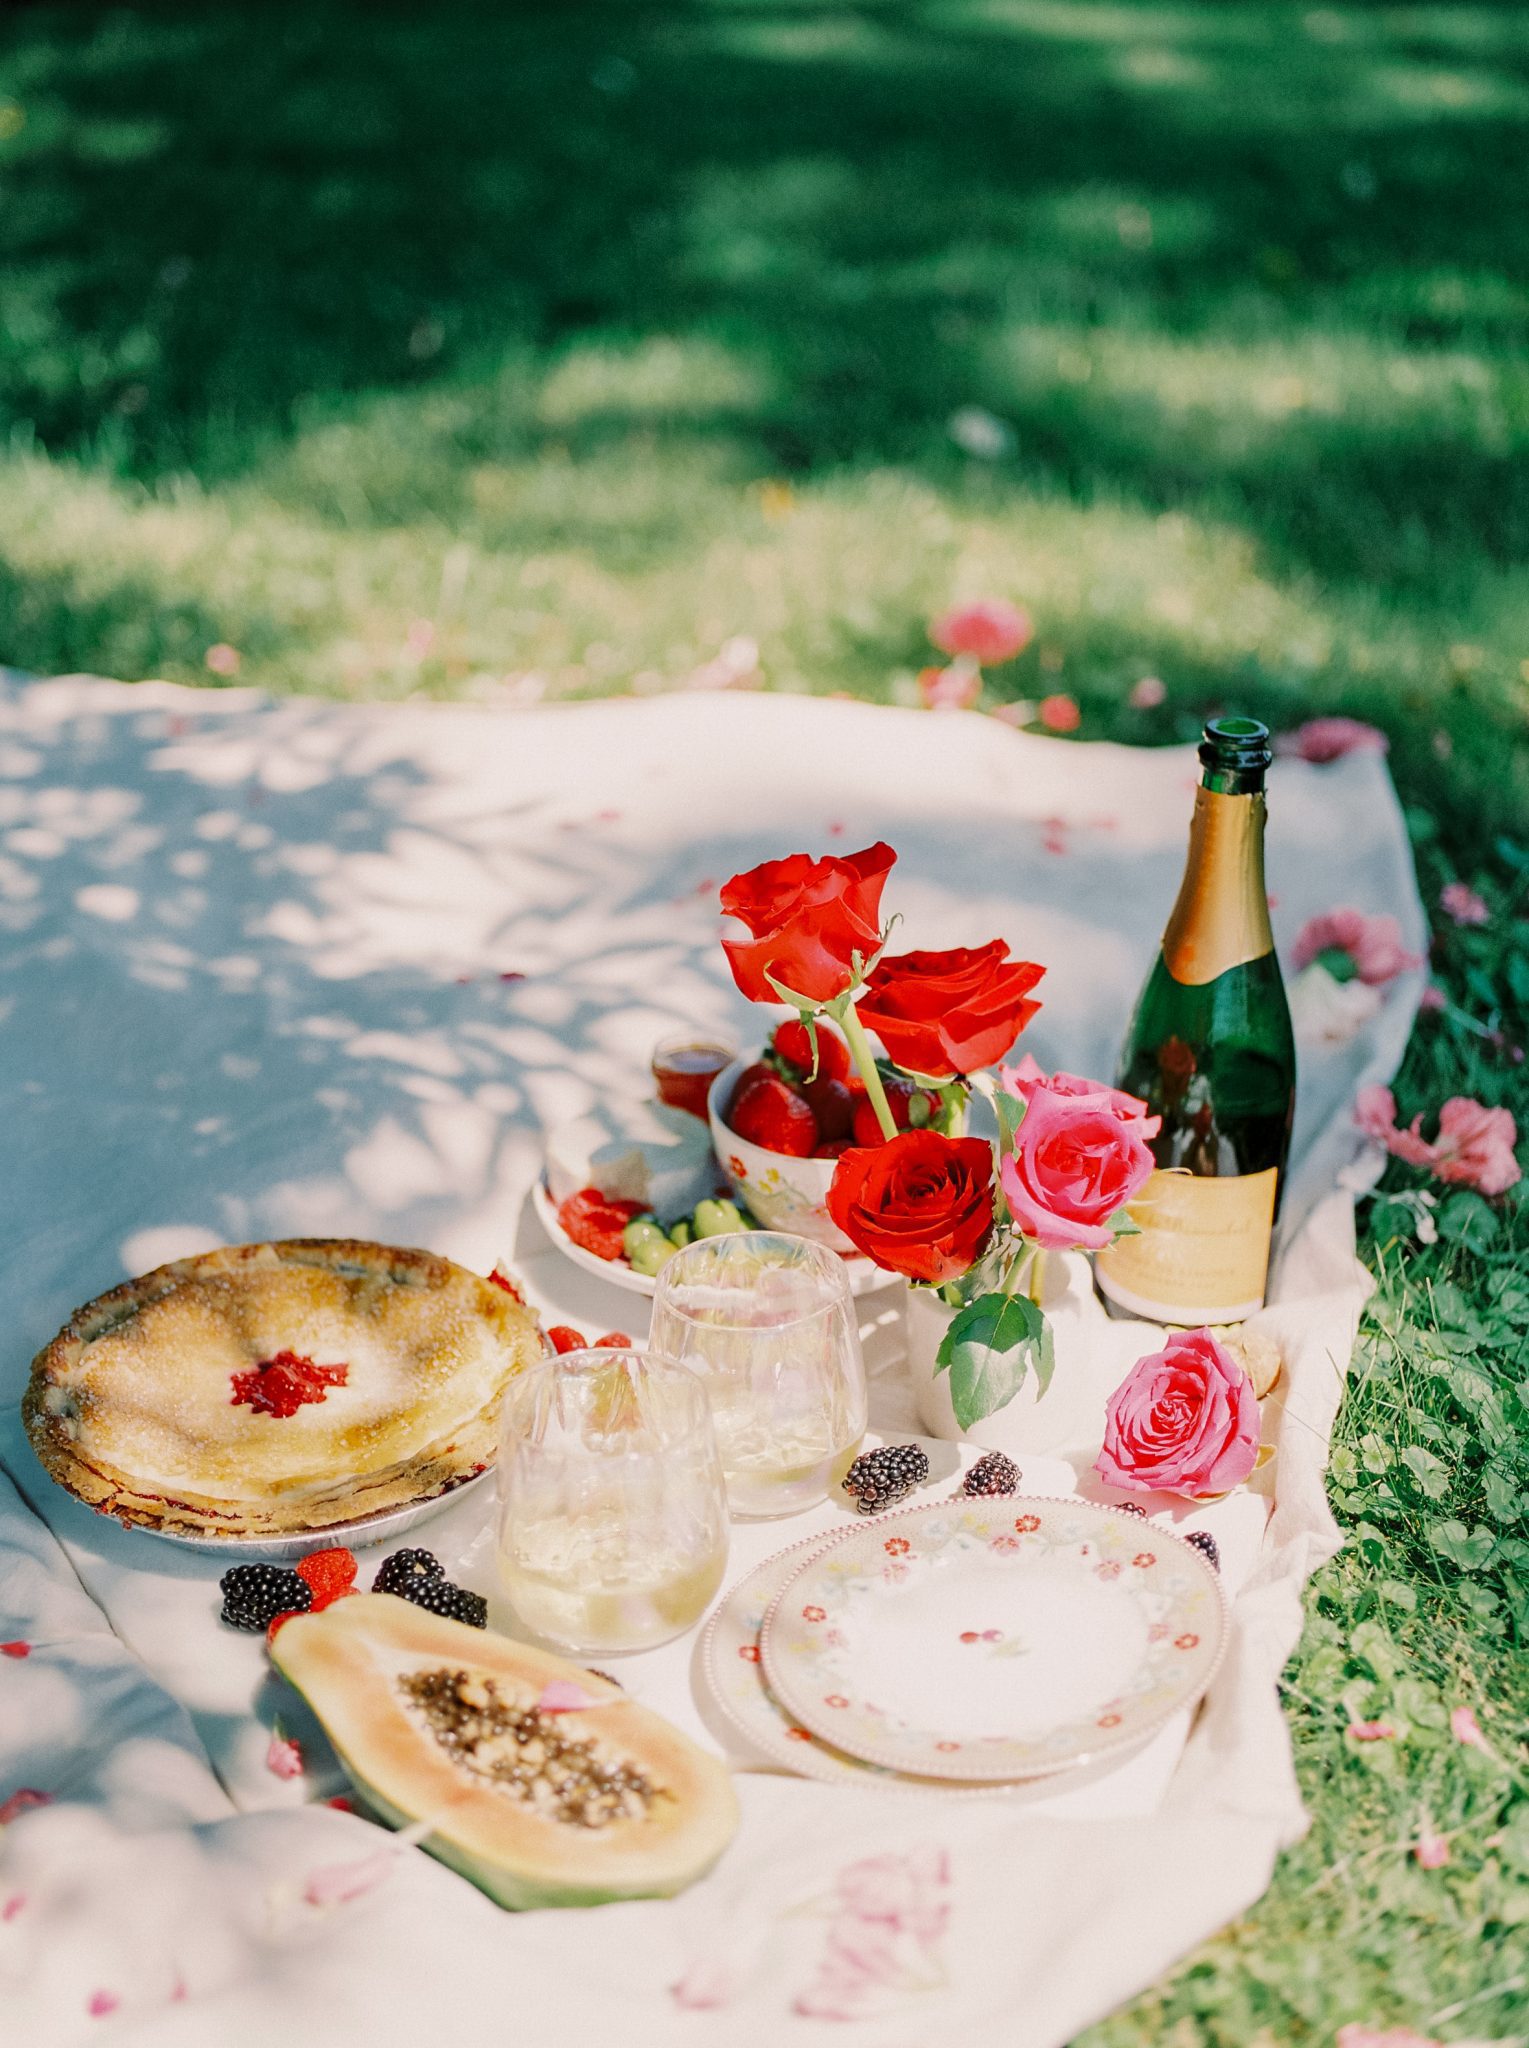 Hot Pink Perfection for this Picnic in the Park Valentine's Day Inspiration Featured by Brontë Bride, red roses, picnic in the park